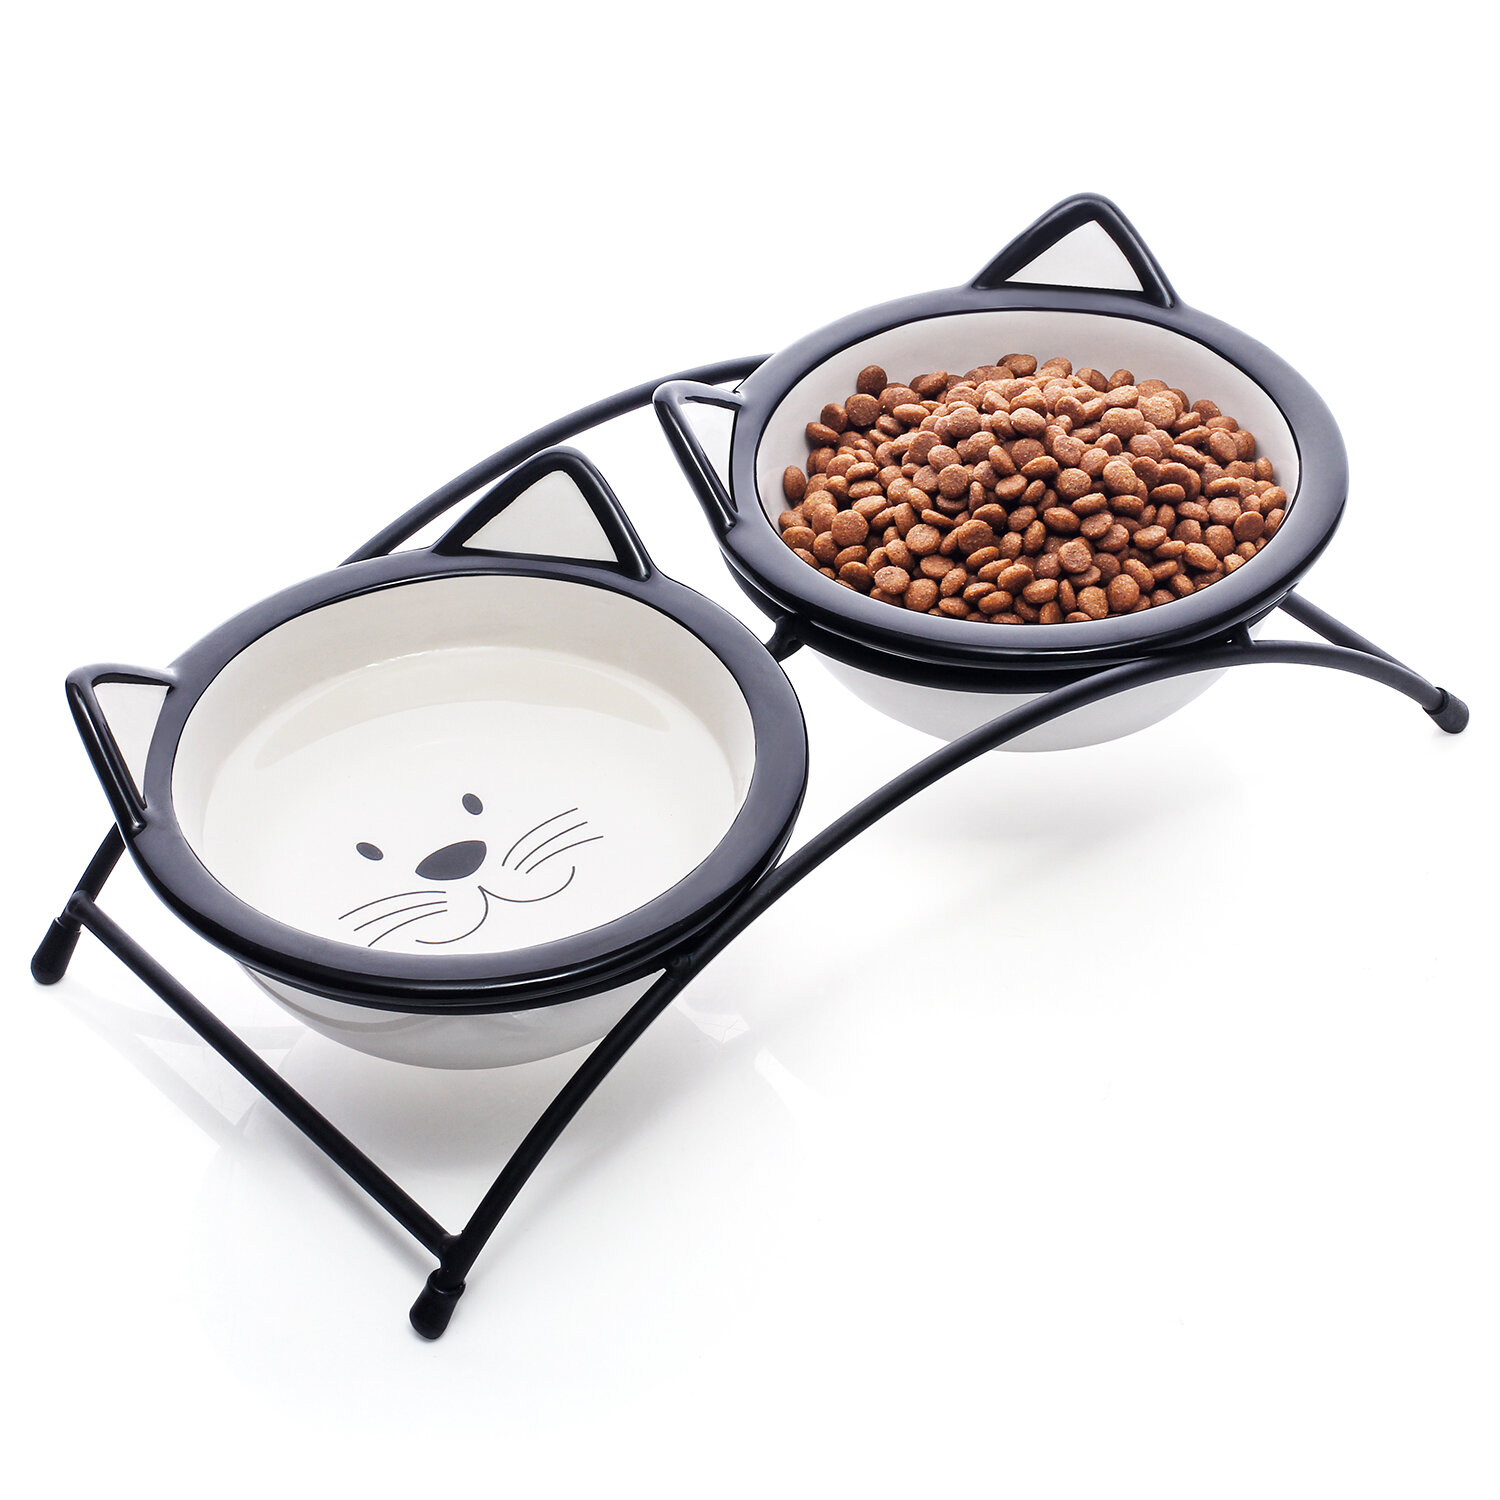 Dual S Feeder - Food And Water Maze Interactive Bowl For Pets - Ideal For  Small To Medium Dogs, Puppies, Cats - Removable Stainless Steel Bowl - No